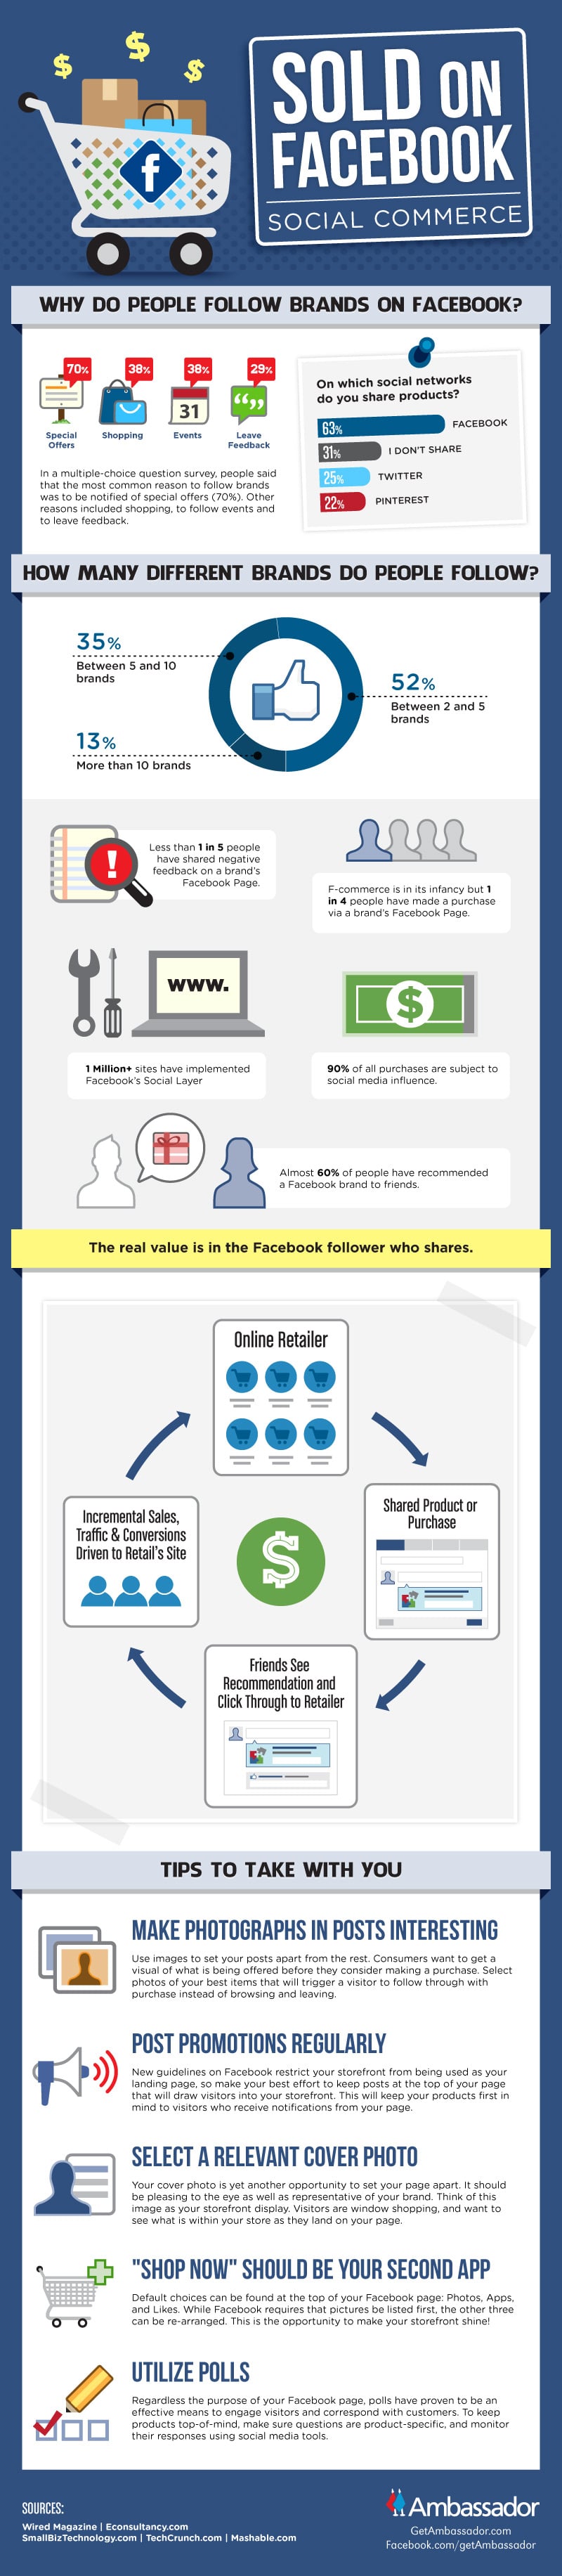 social-commerce-on-facebook-infographic